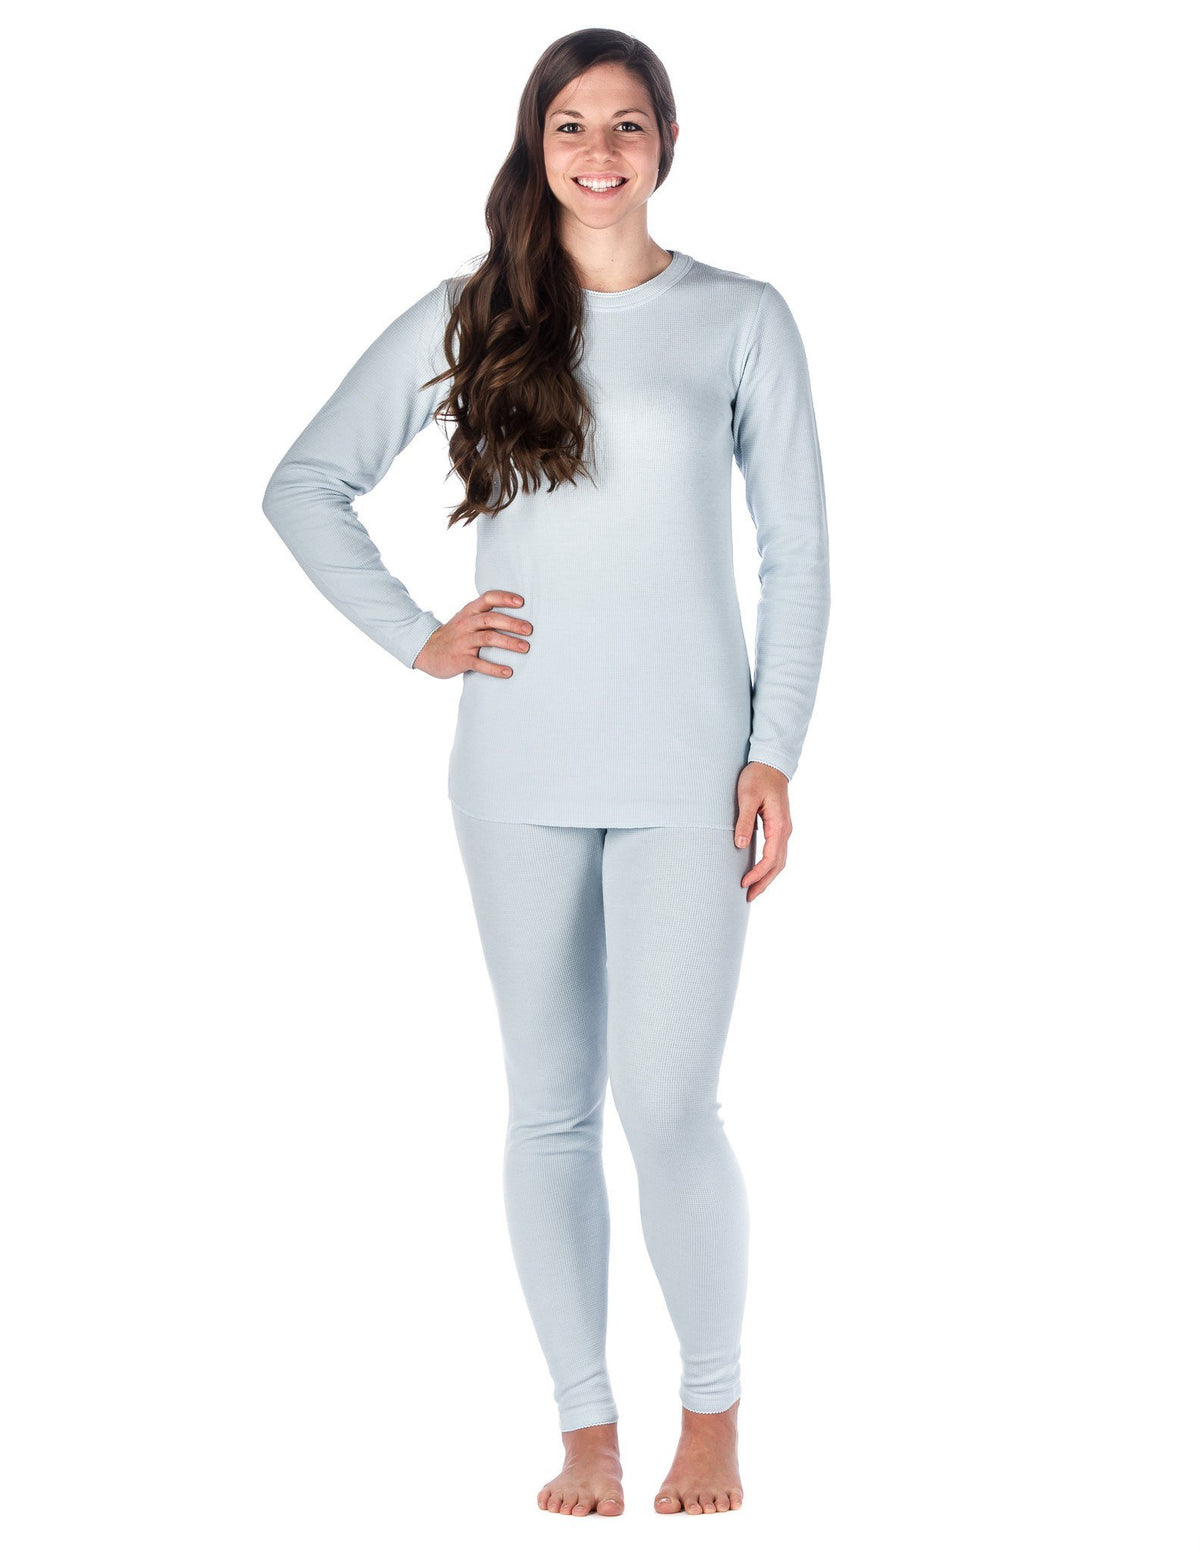 Women's Classic Waffle Knit Thermal Top and Bottom Set - Light Blue